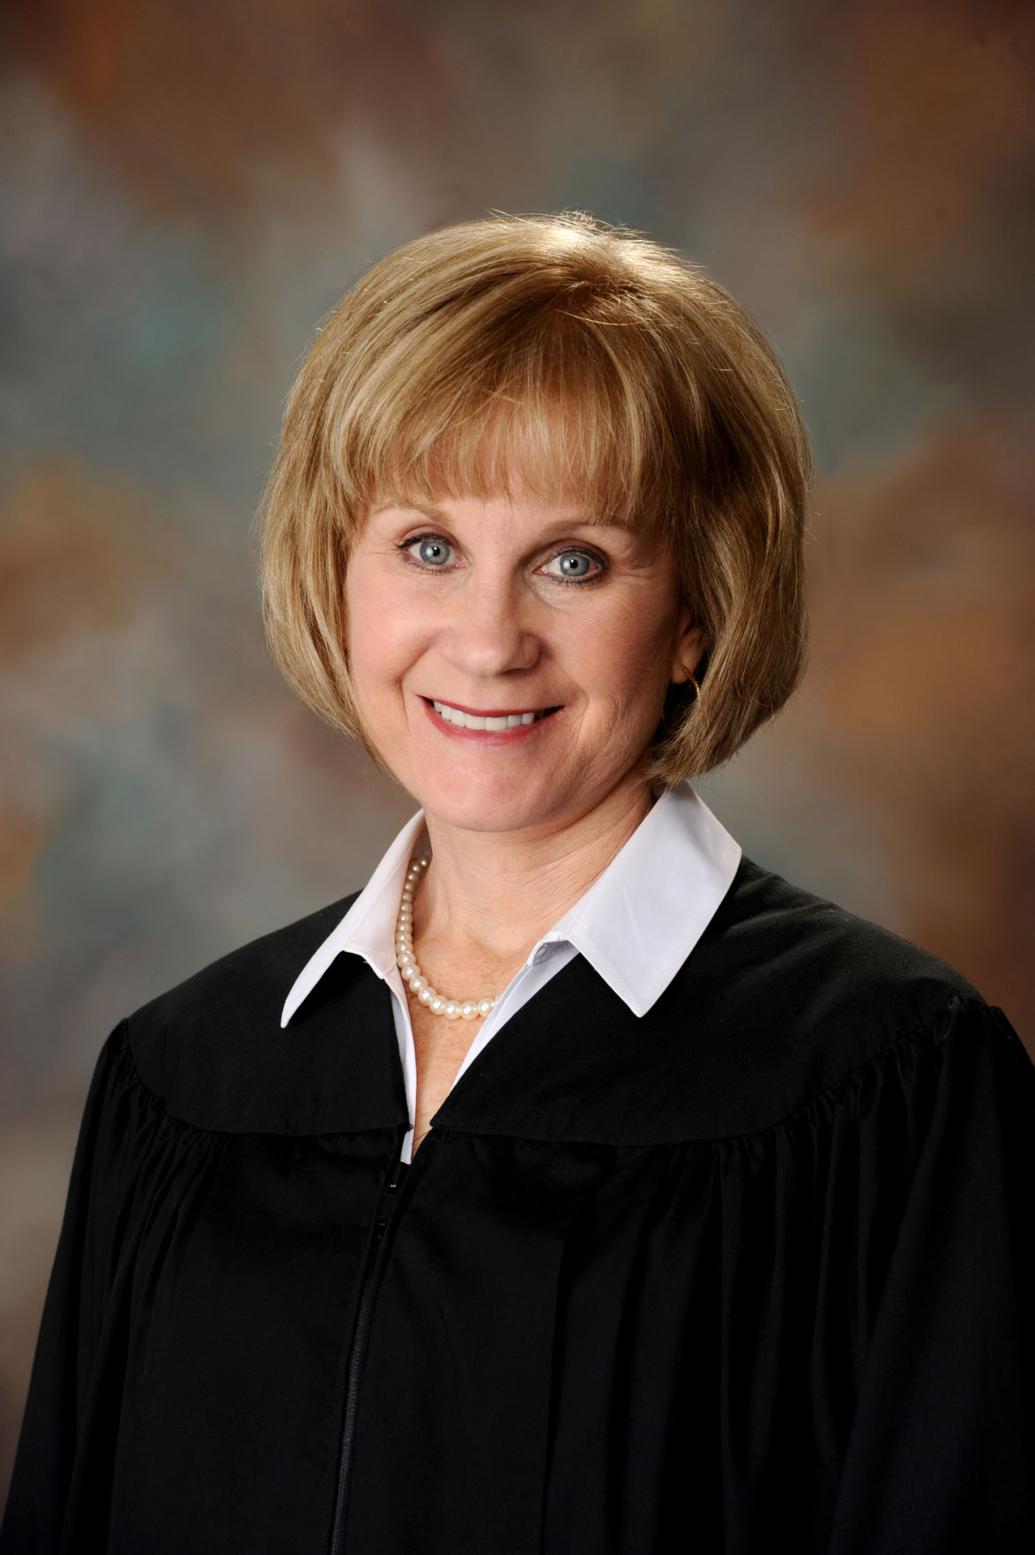 McIntyre first female judge in 5th District The Franklin Sun